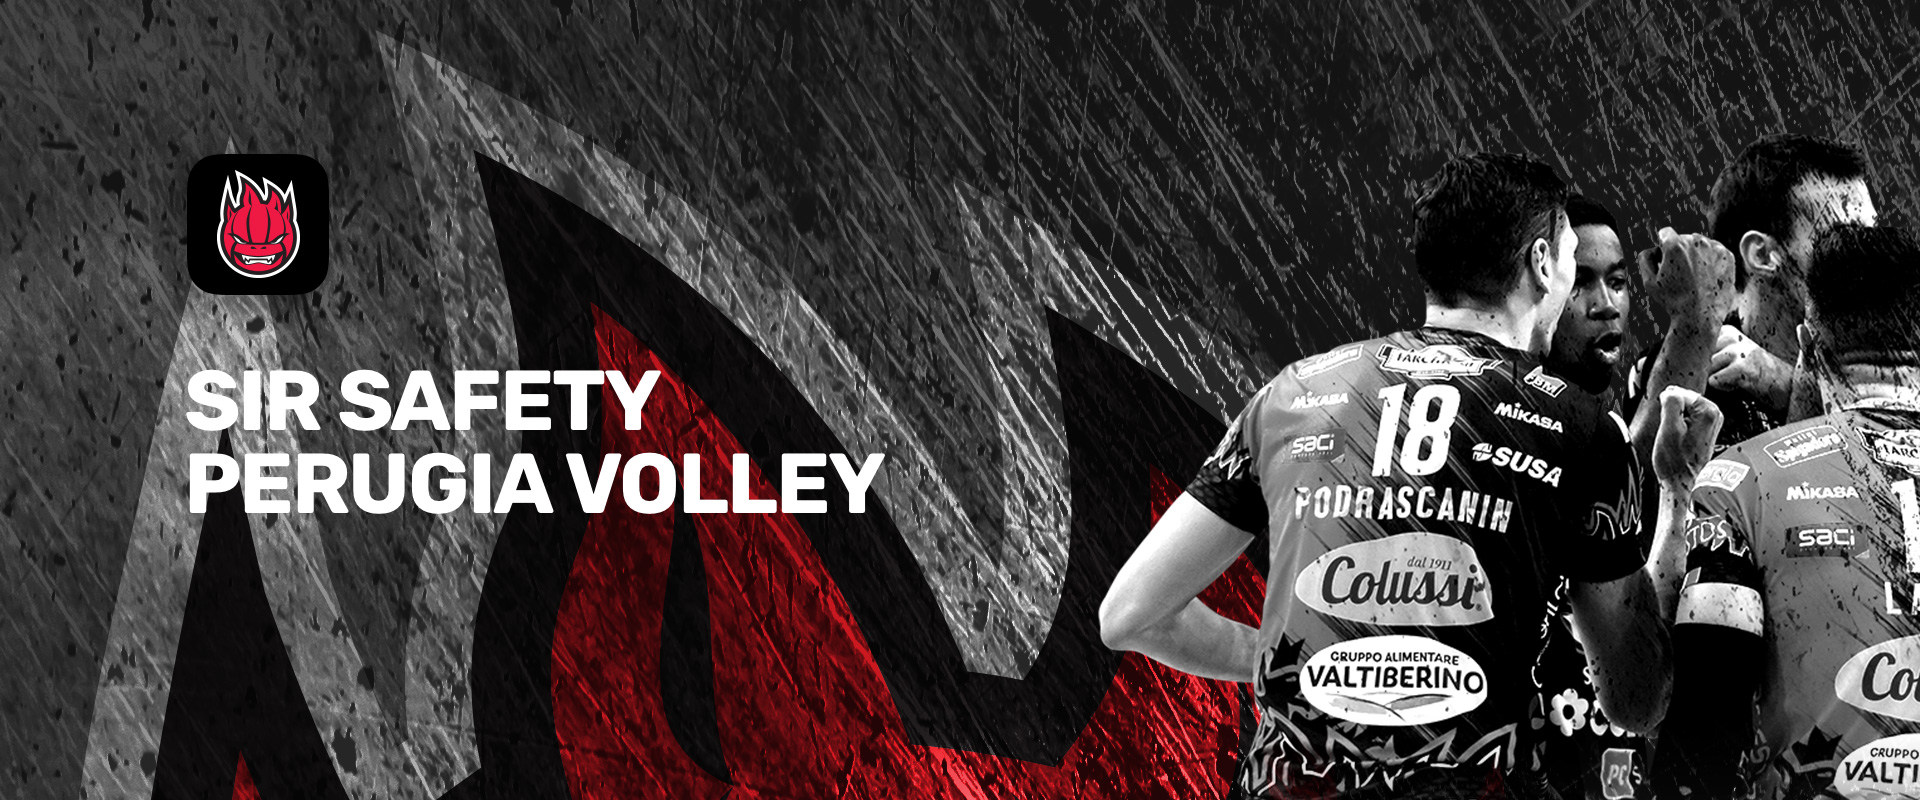 SIR Safety Perugia Volley